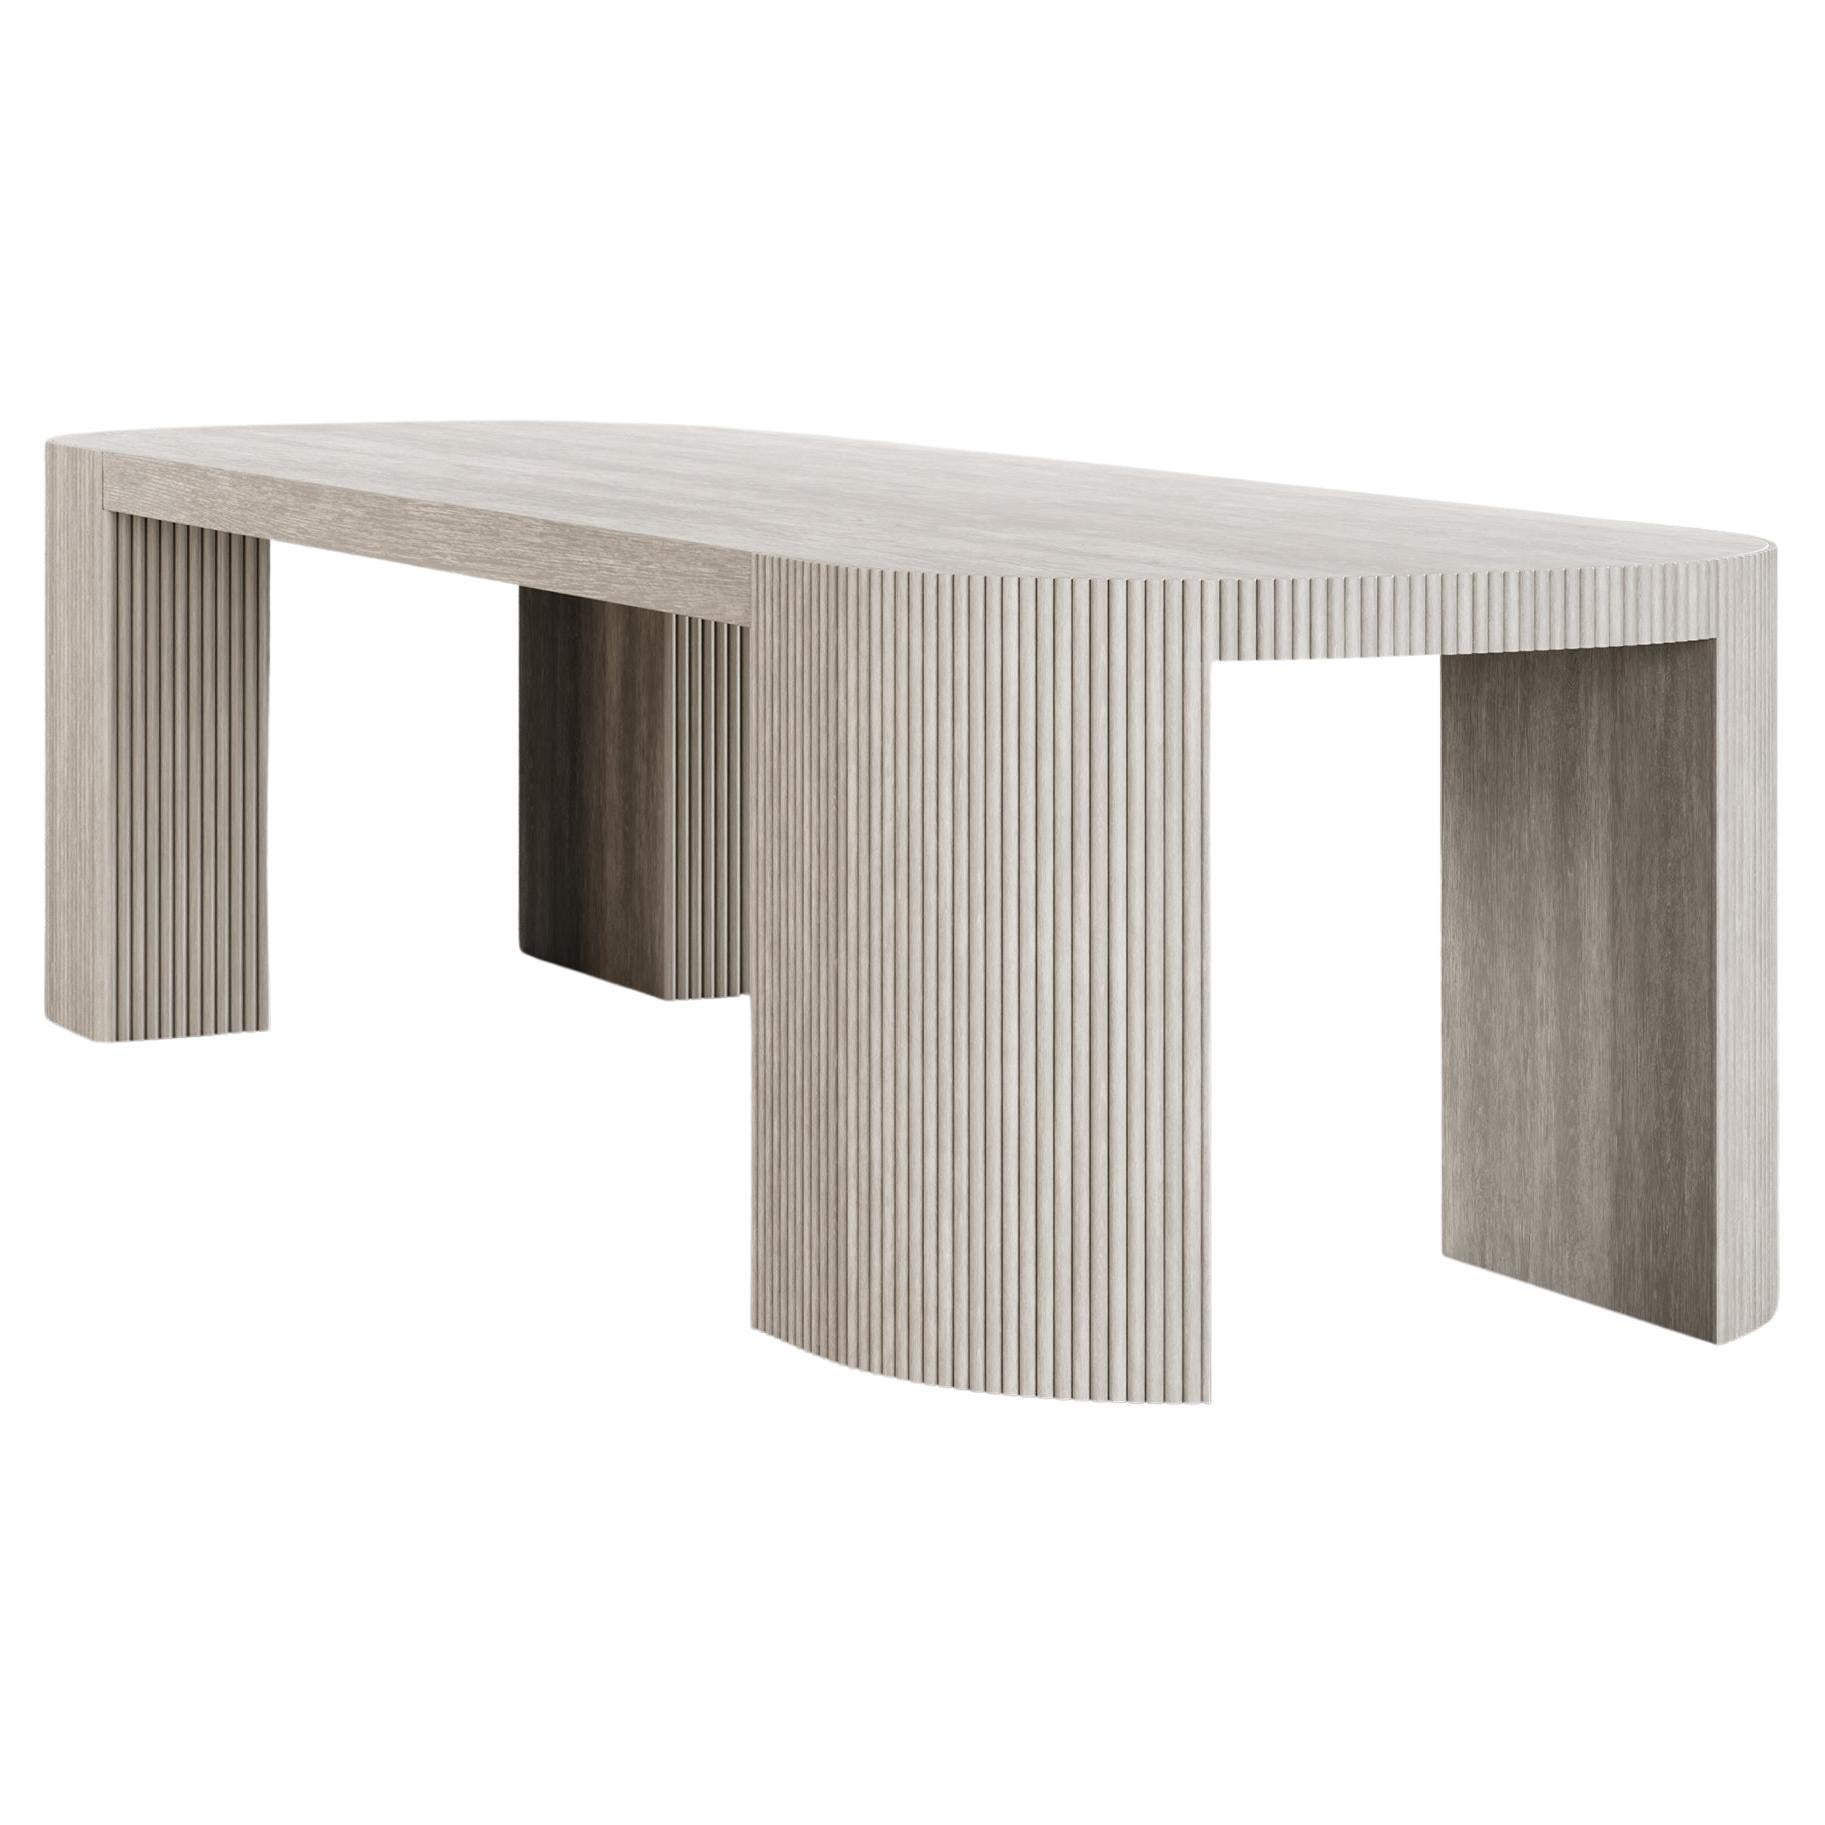 SWAY DINING TABLE - Modern Design with Sandy Oak + Matte Lacquer For Sale